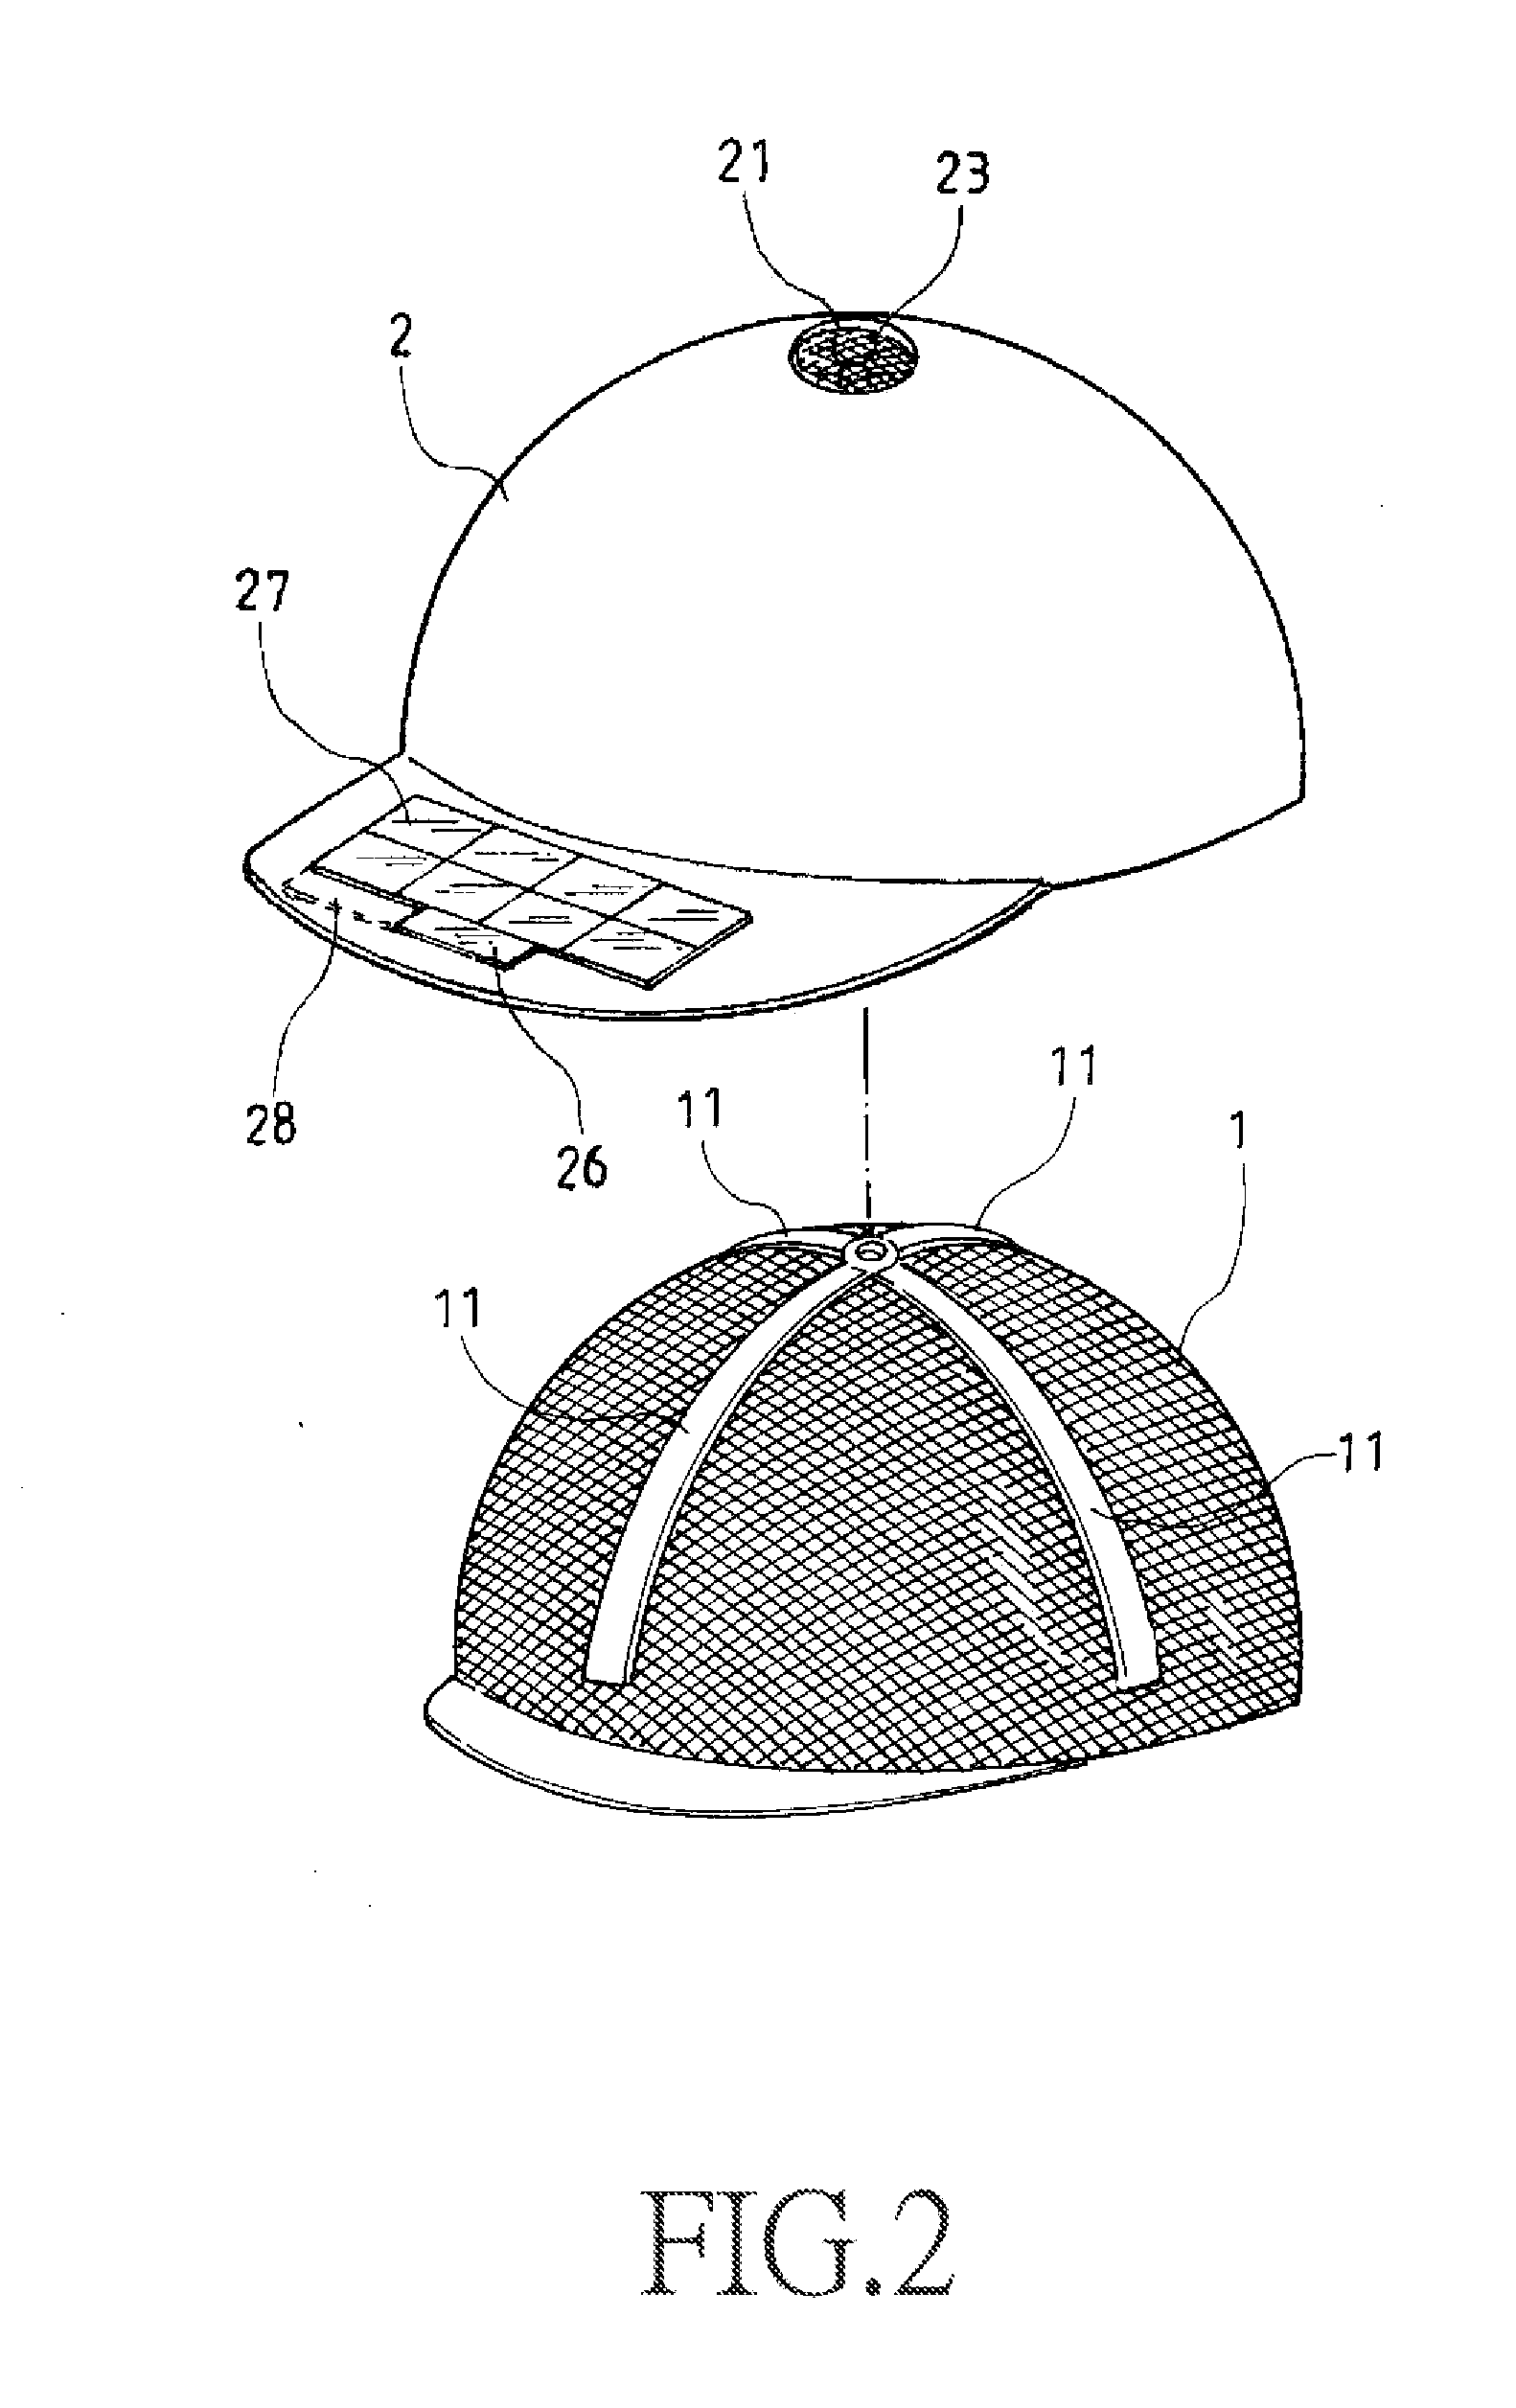 Solar-powered ventilated hat with light chasing function